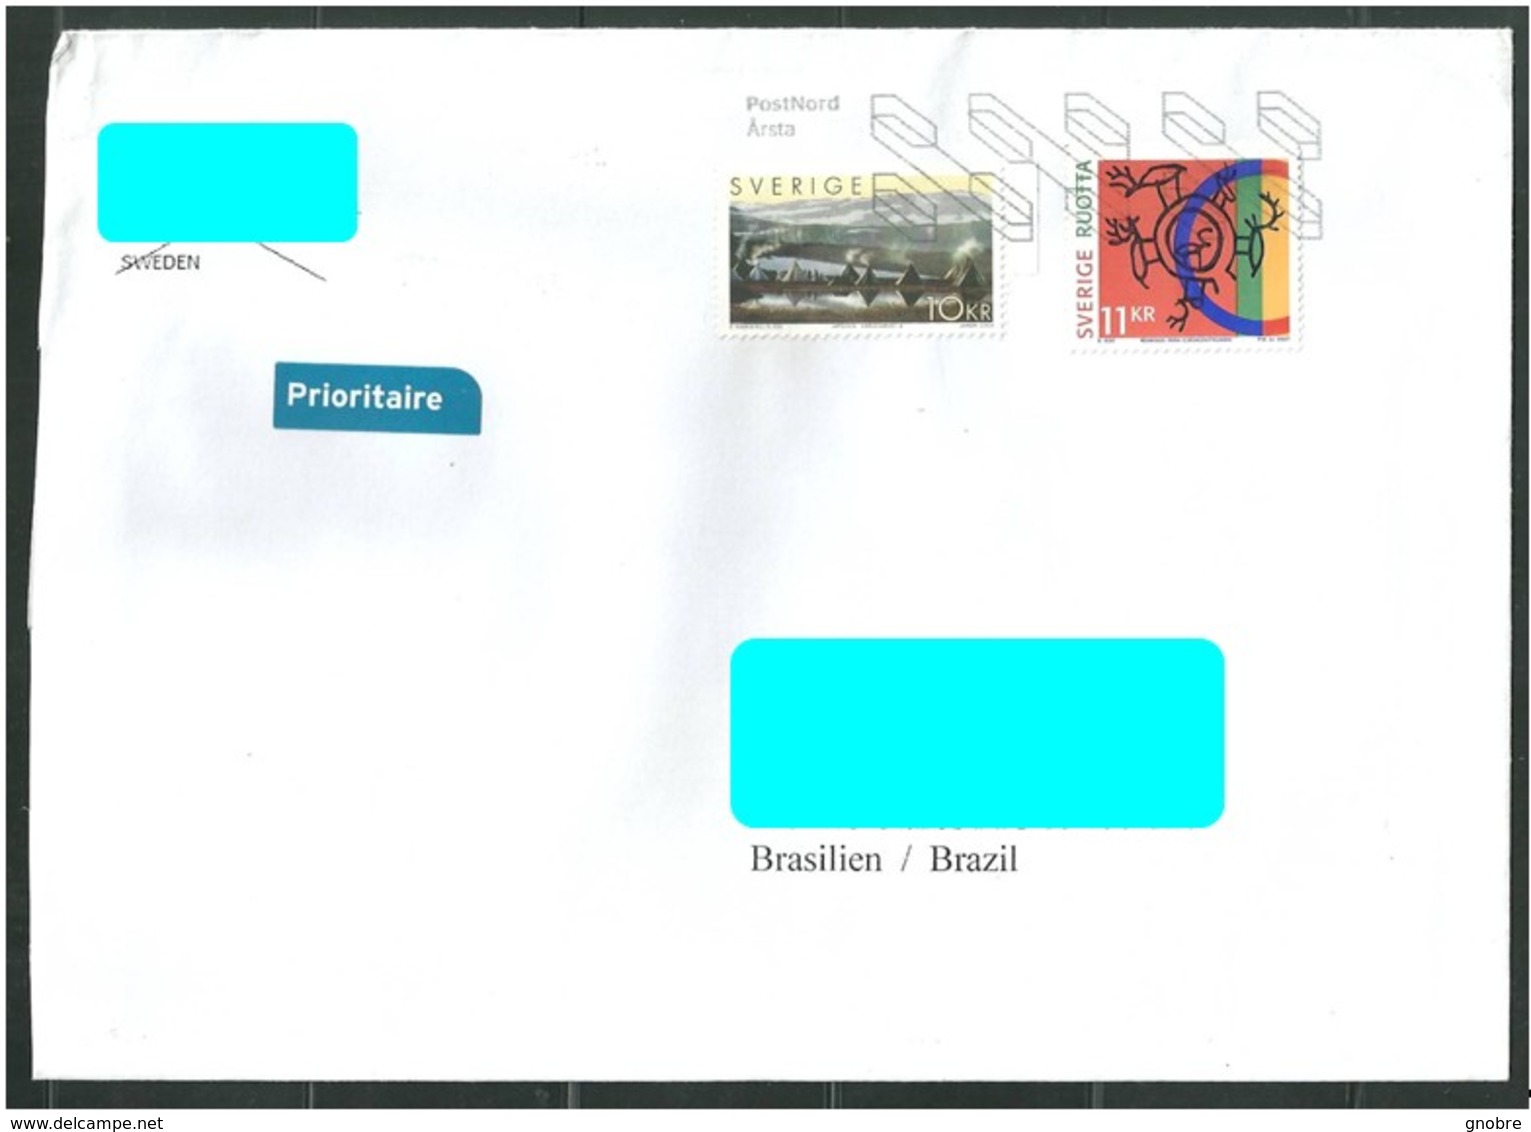 SWEDEN To Brazil Cover Sent In 2018? With 2 Topical Stamps And Beautiful Cancel Mark (GN 0117). - Lettres & Documents